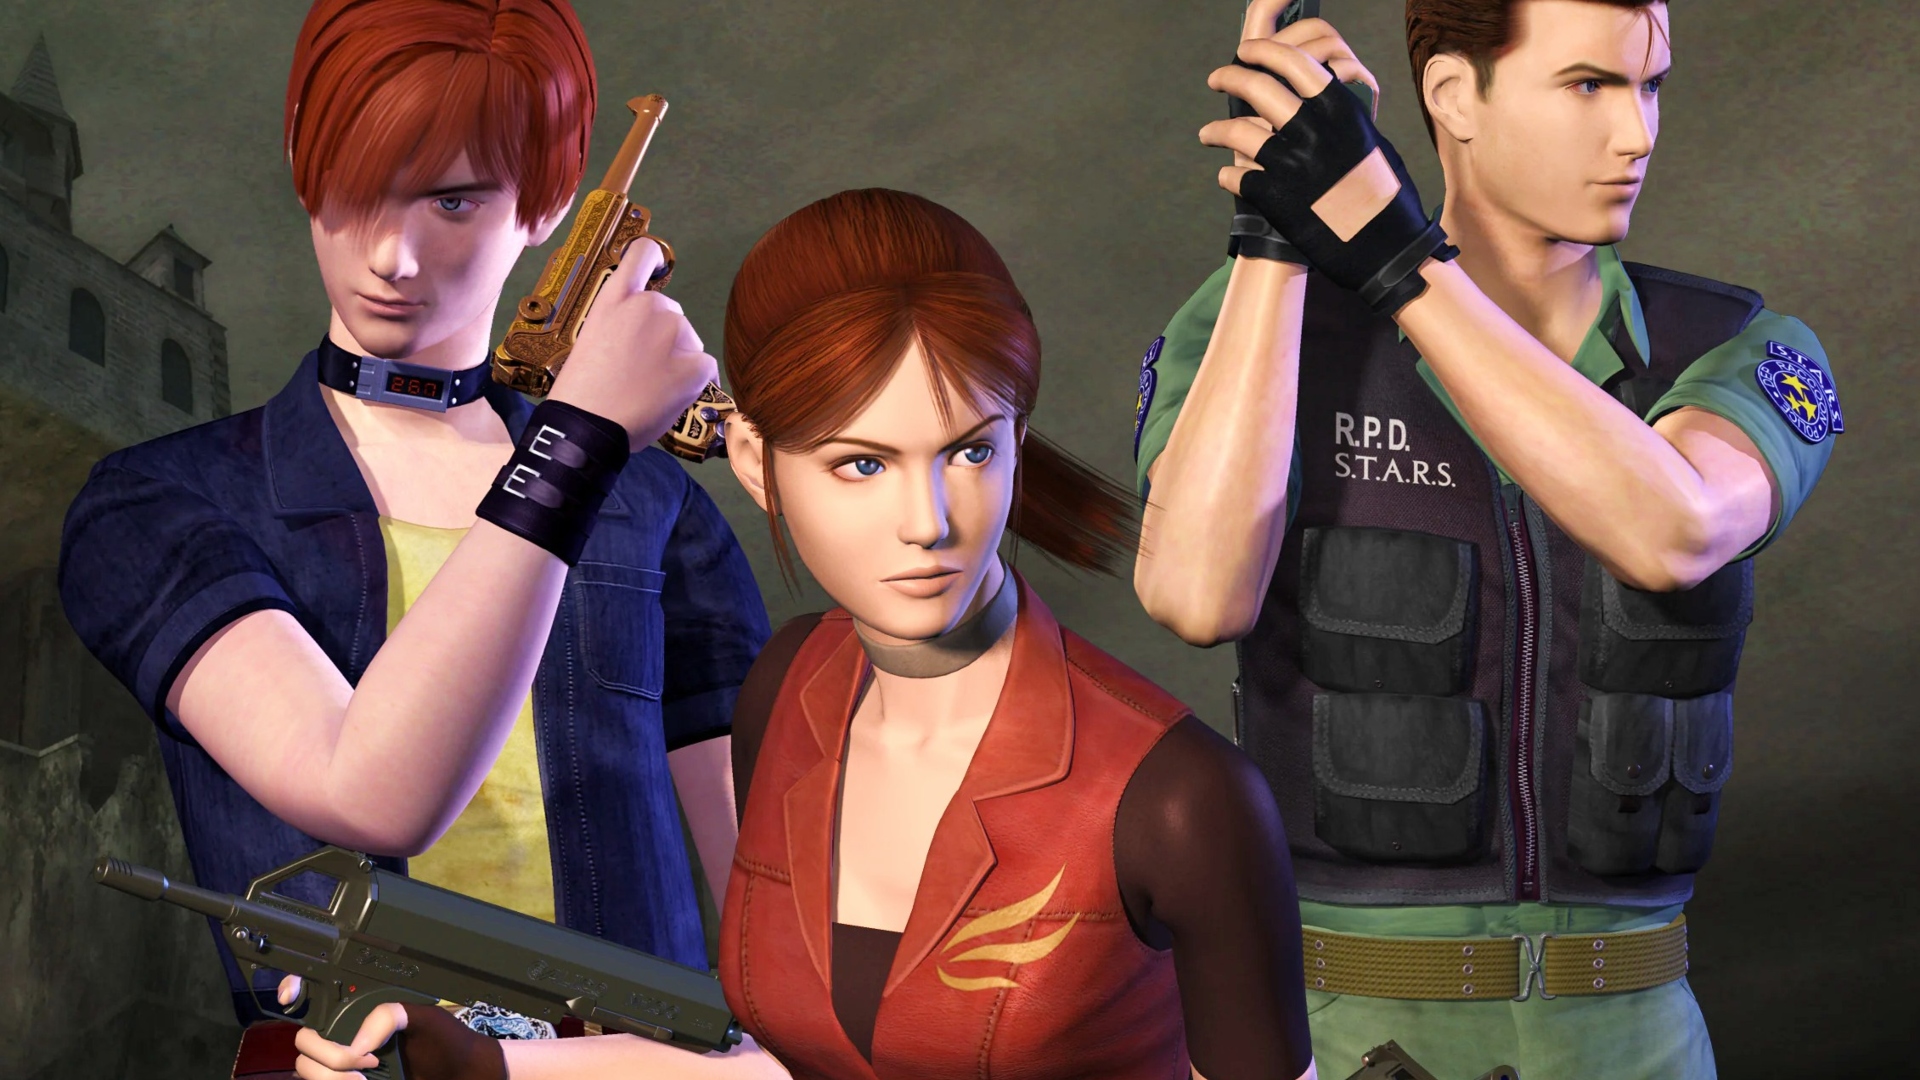 Looking back on the Resident Evil universe